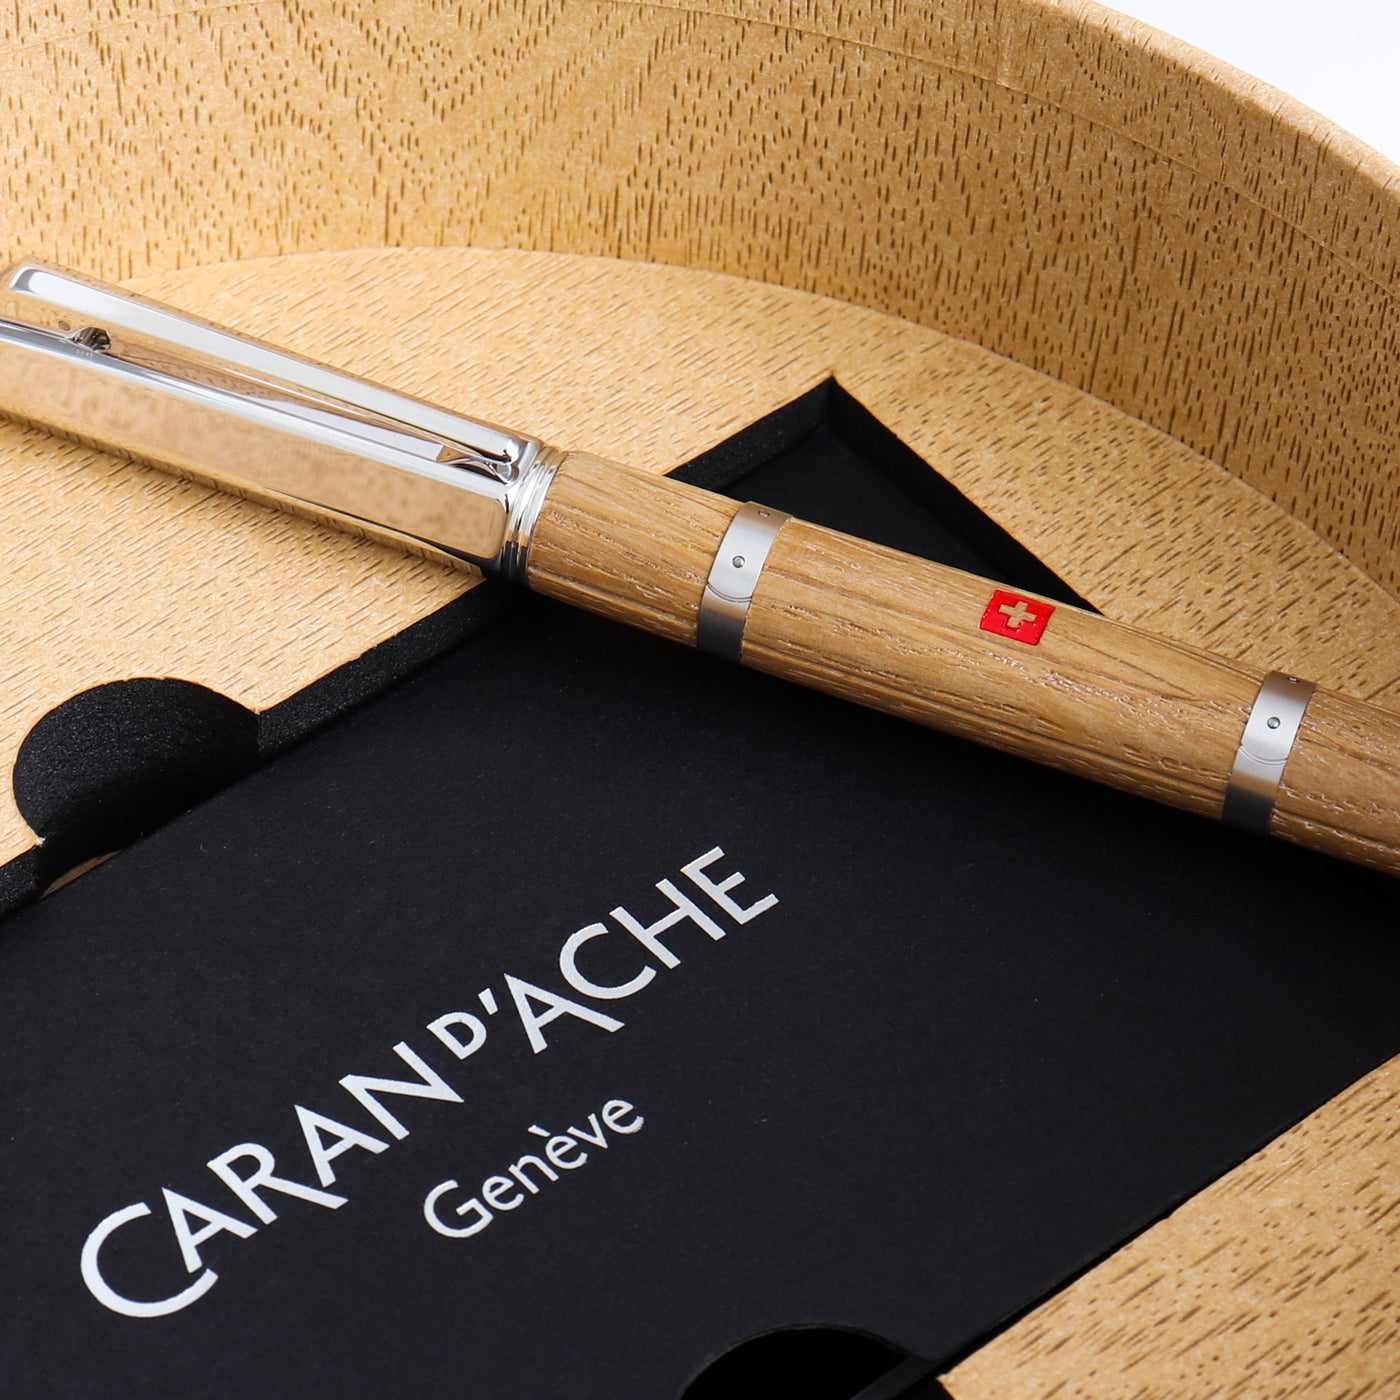 Caran d'Ache Varius Le Viny Satin Polished Riveted Metal Strapping Fountain Pen